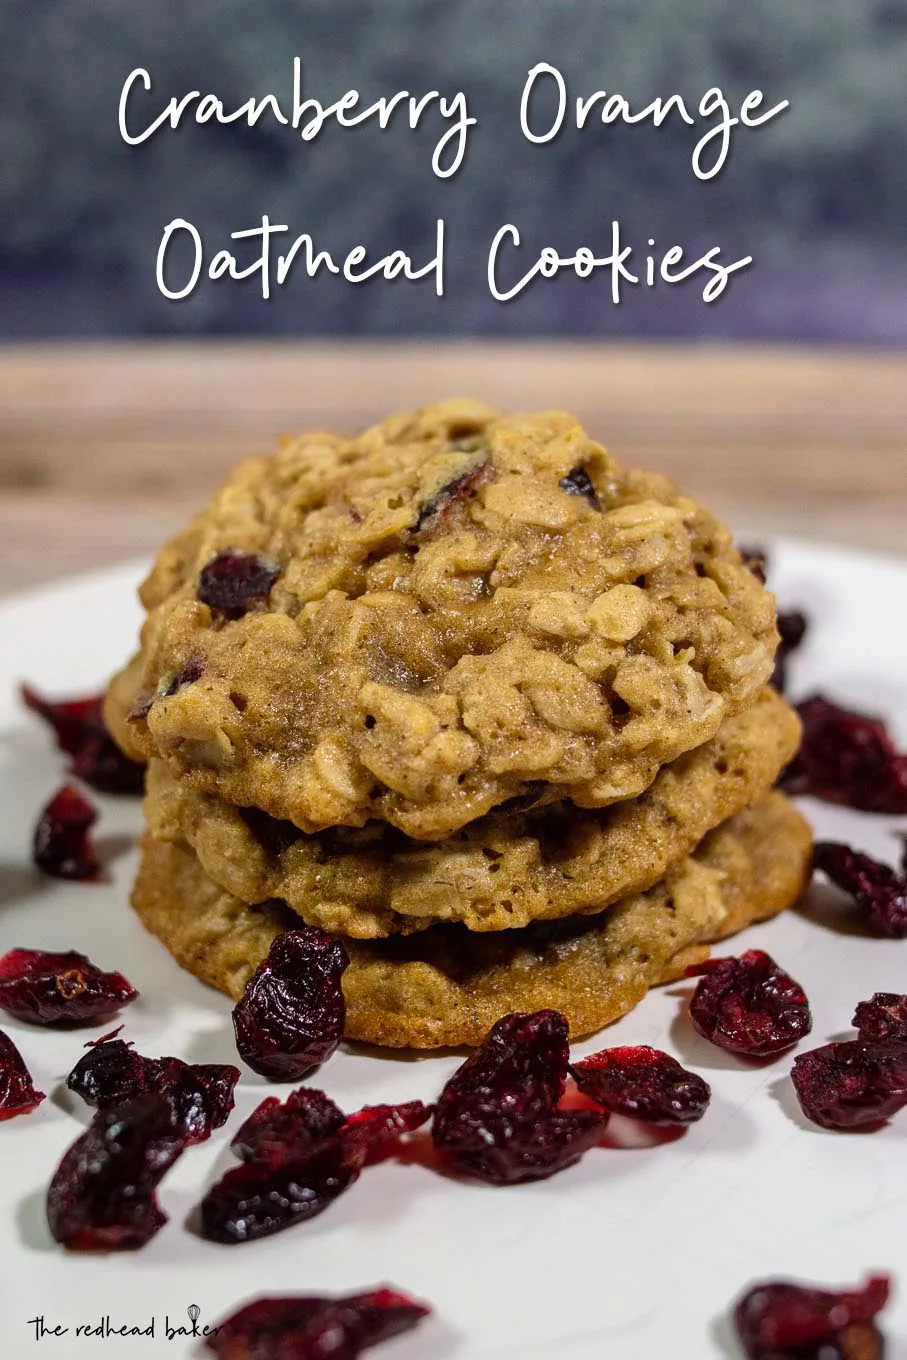 Three cranberry-orange oatmeal cookies in a stack surrounded by dried cranberries